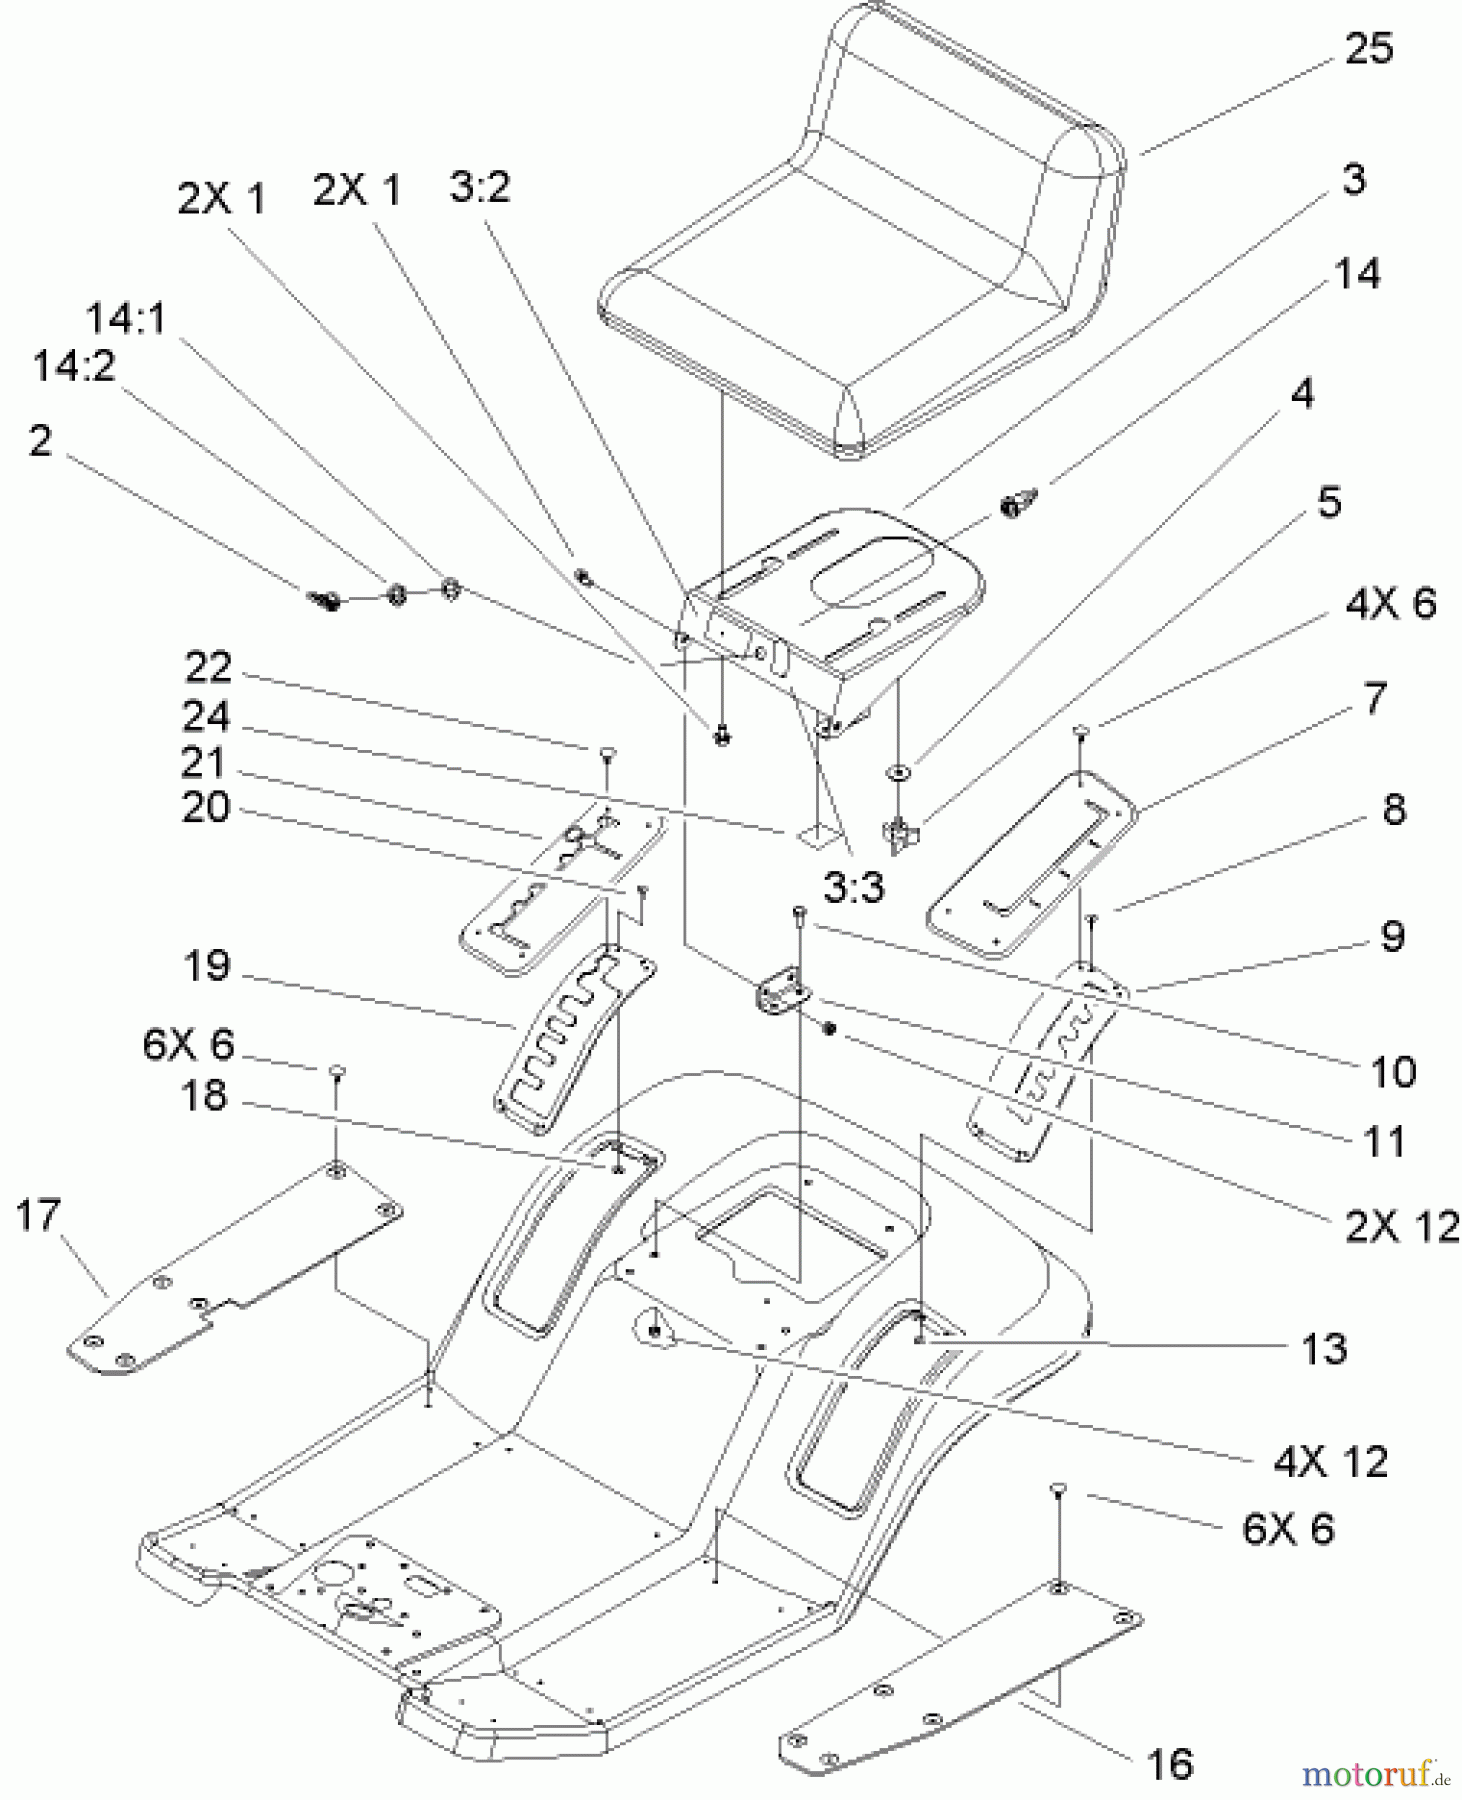  Toro Neu Mowers, Lawn & Garden Tractor Seite 1 71209 (13-32XLE) - Toro 13-32XLE Lawn Tractor, 2004 (240000001-240999999) REAR BODY AND SEAT ASSEMBLY